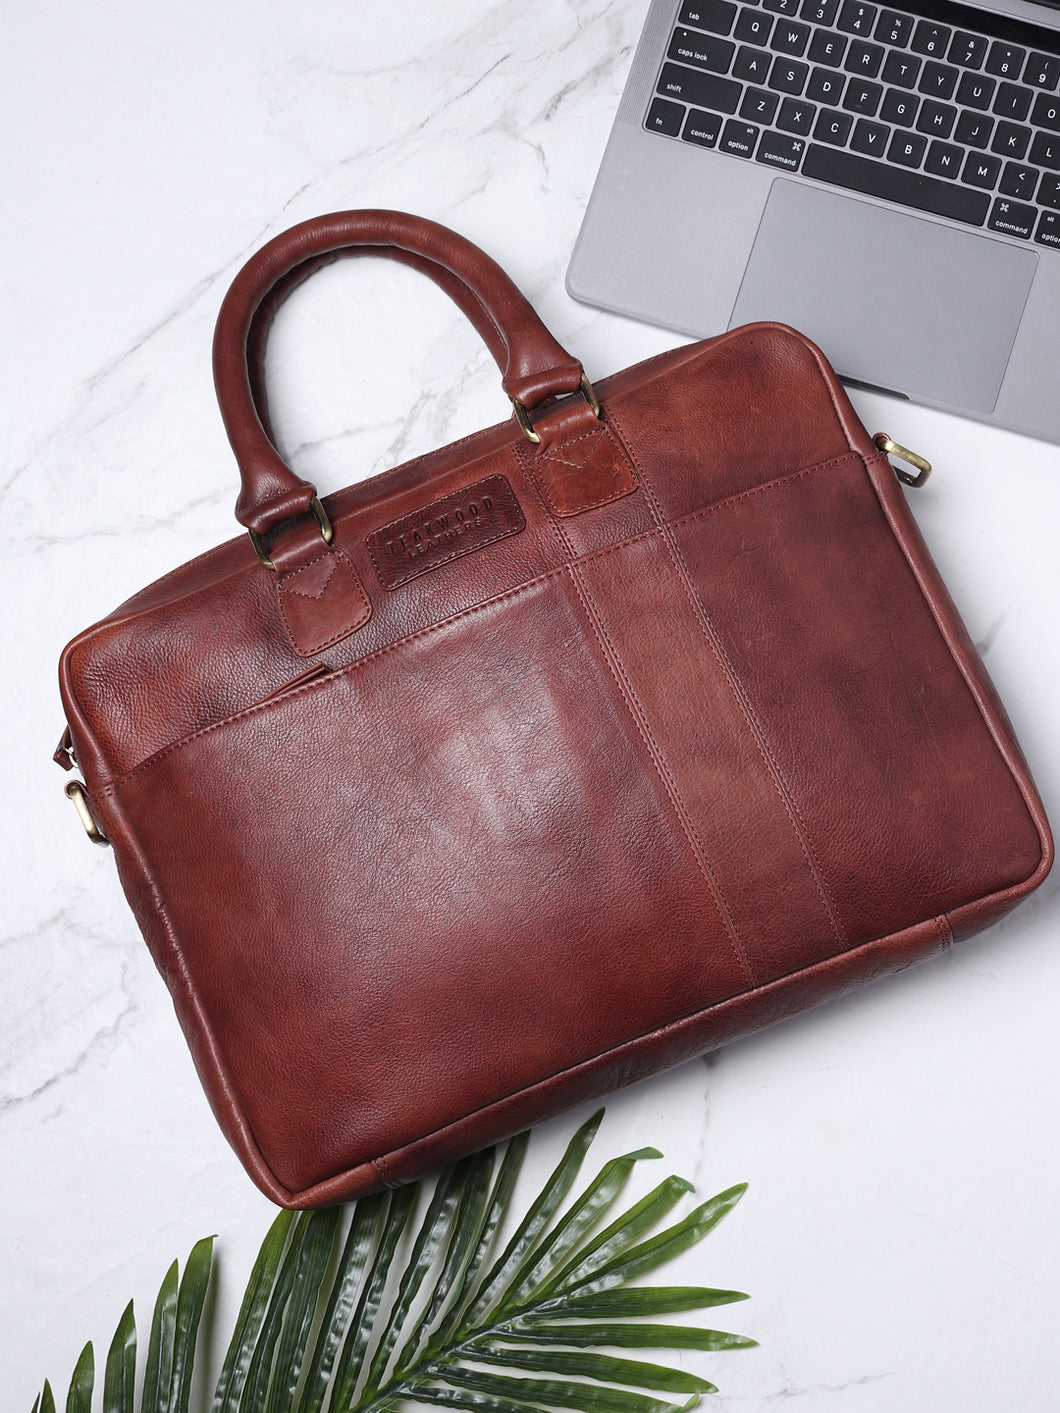 Unisex Brown Leather Laptop Bag With Detachable Strap